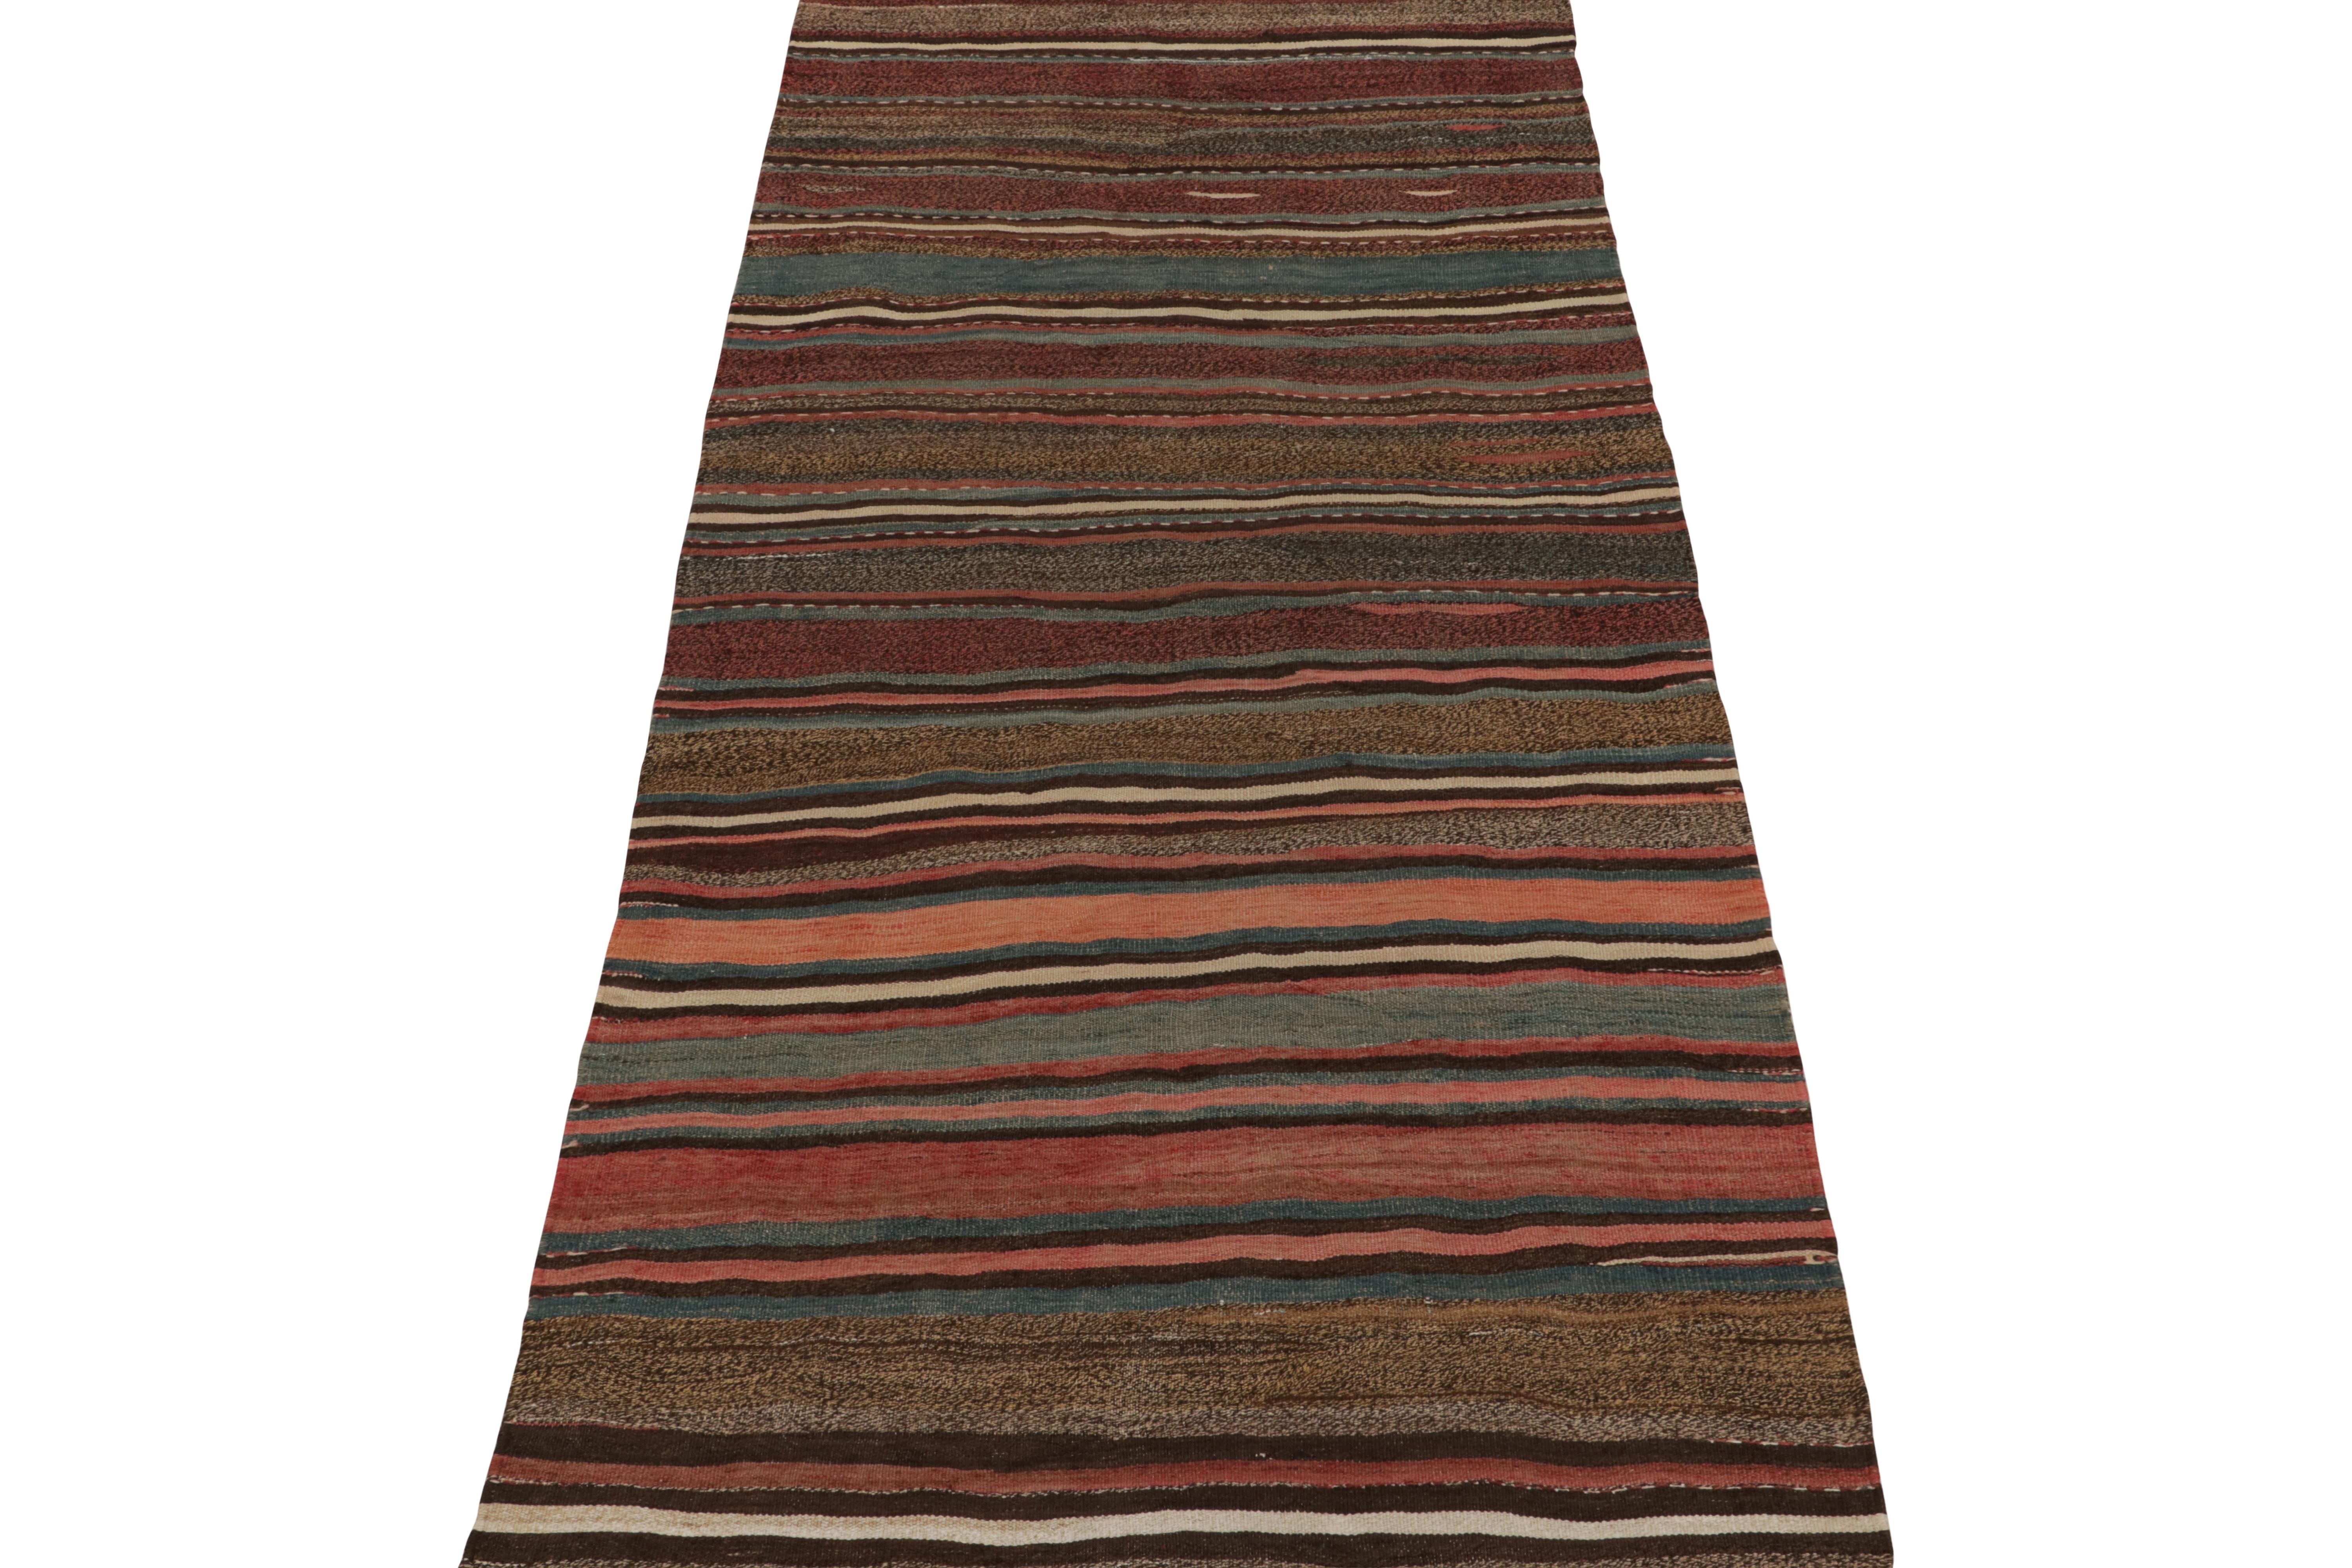 This vintage 5x10 Persian kilim is a unique tribal rug for its period and provenance. Handwoven in wool, it’s believed to be of Shahsavan provenance and originates circa 1950-1960.

Further on the Design:

The field hosts horizontal stripes